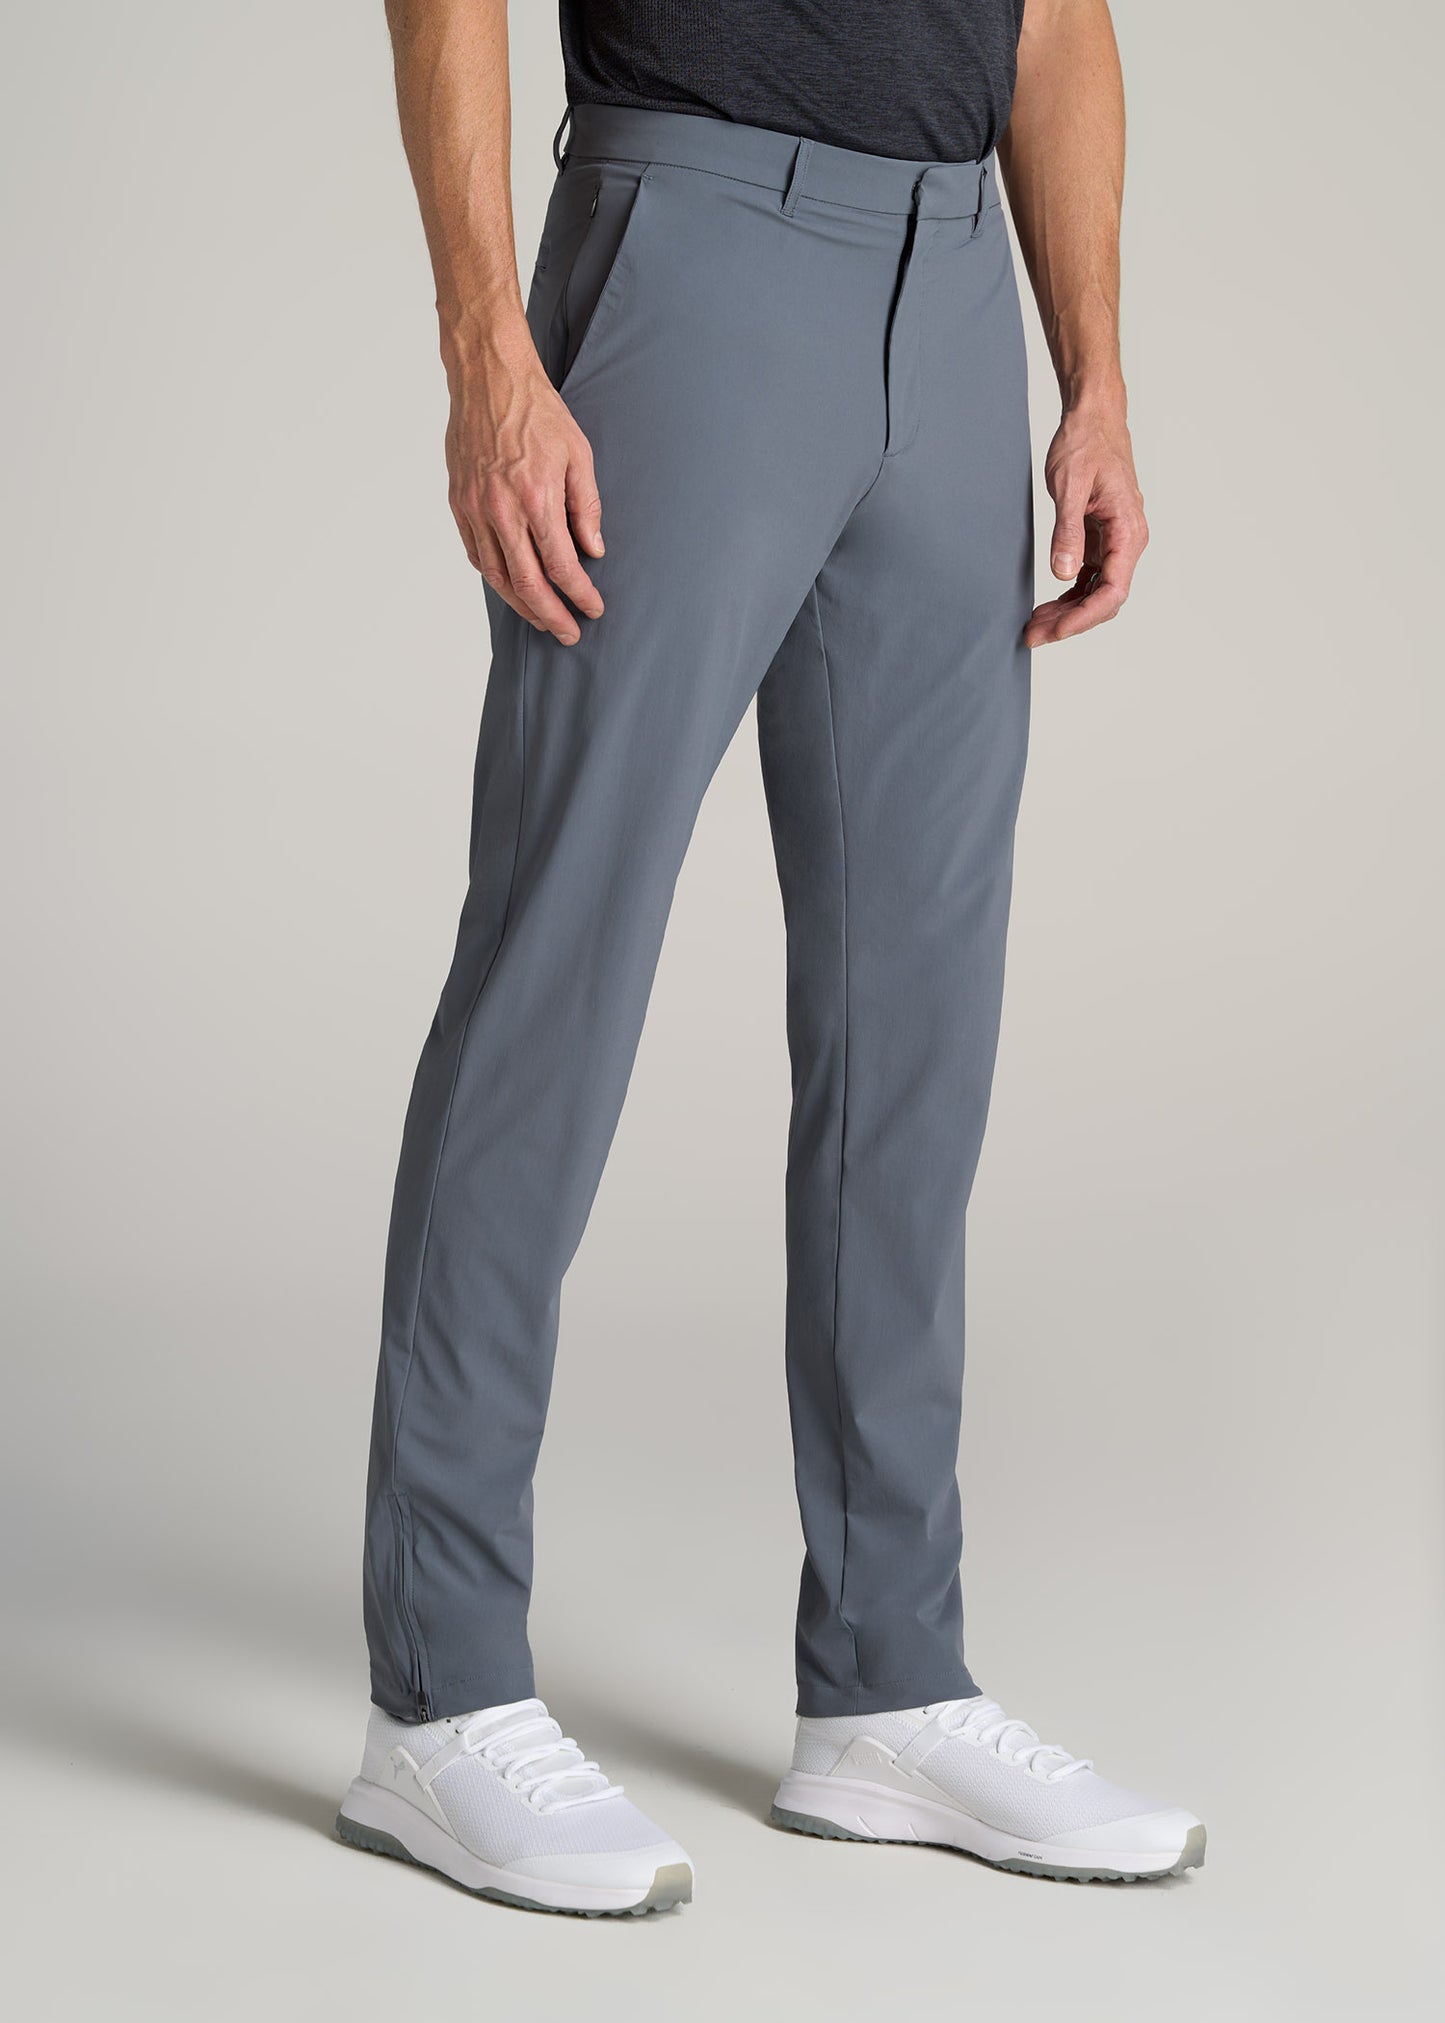    American-Tall-Men-Performance-Casual-Pants-Smoky-Blue-side